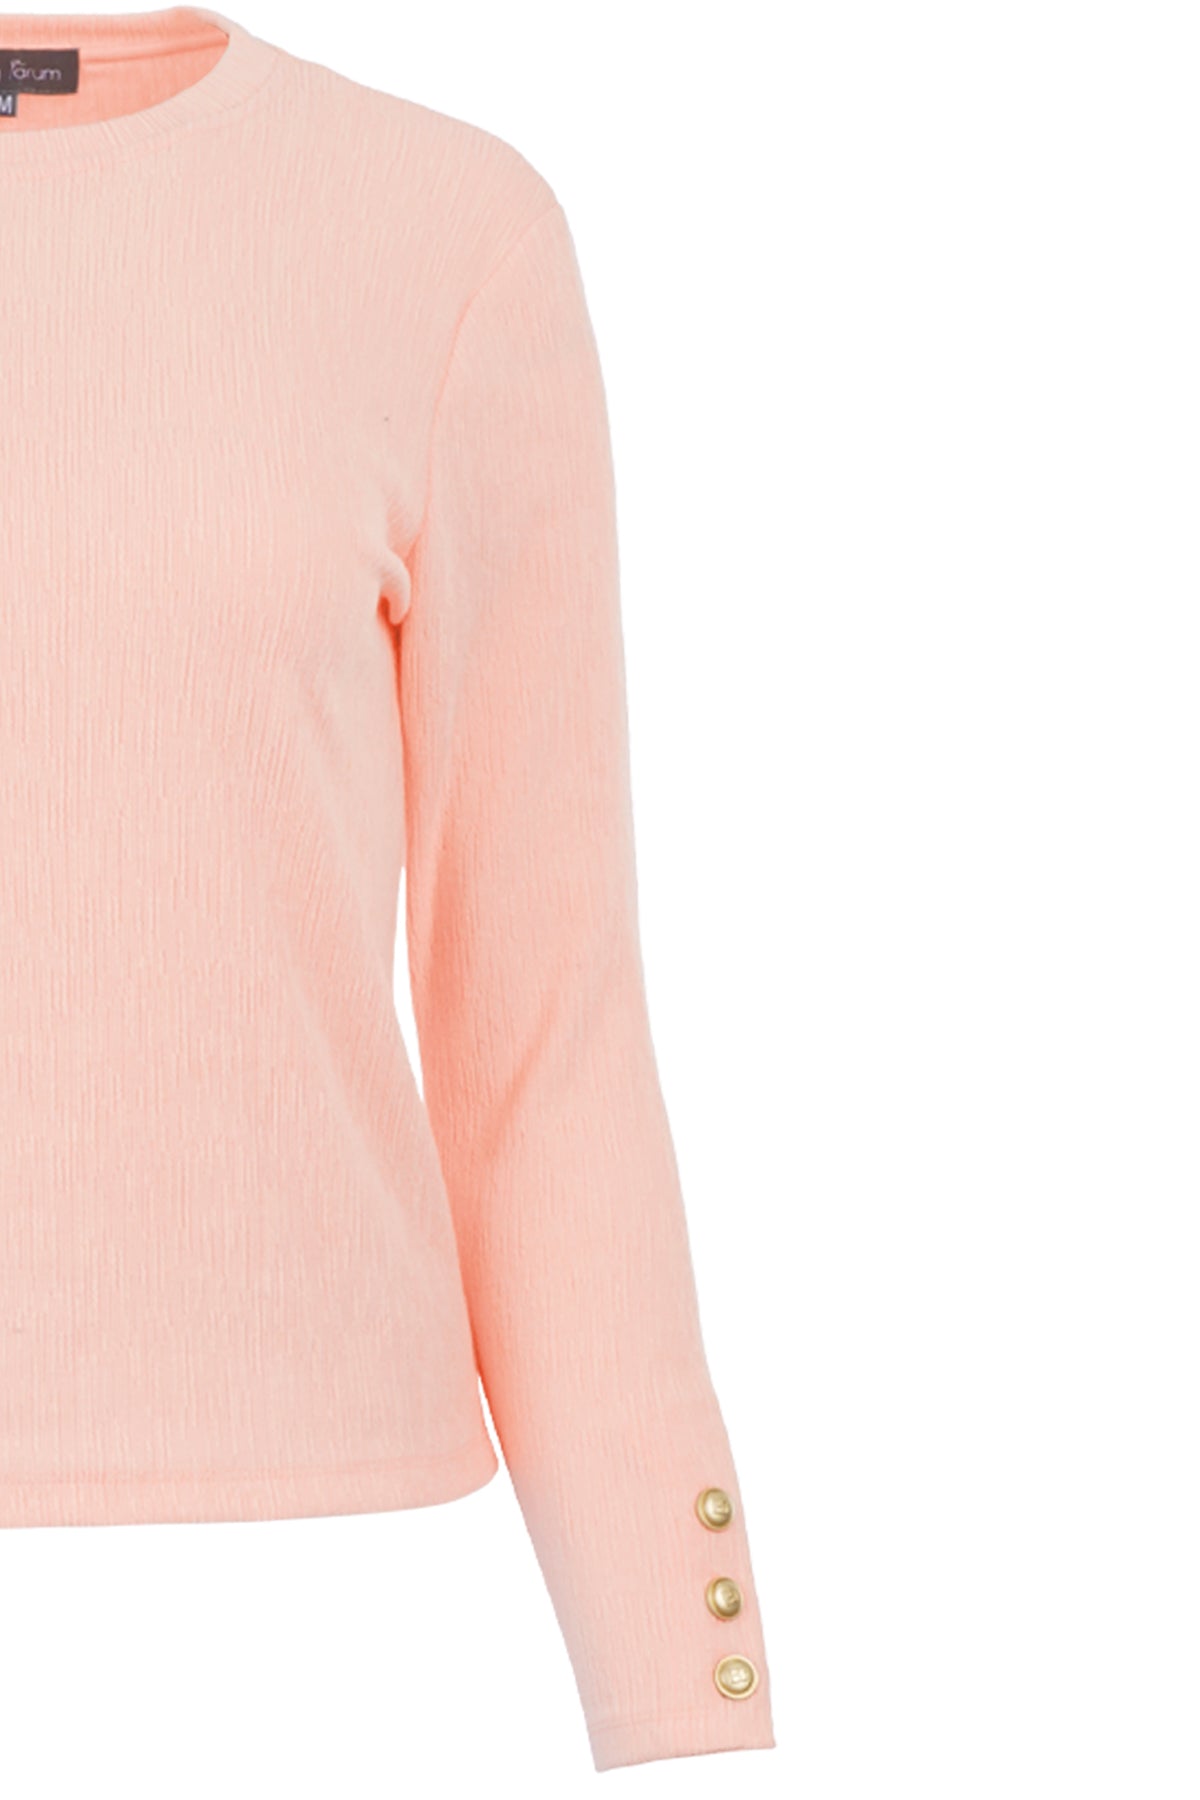 Textured Knit Top - Coral